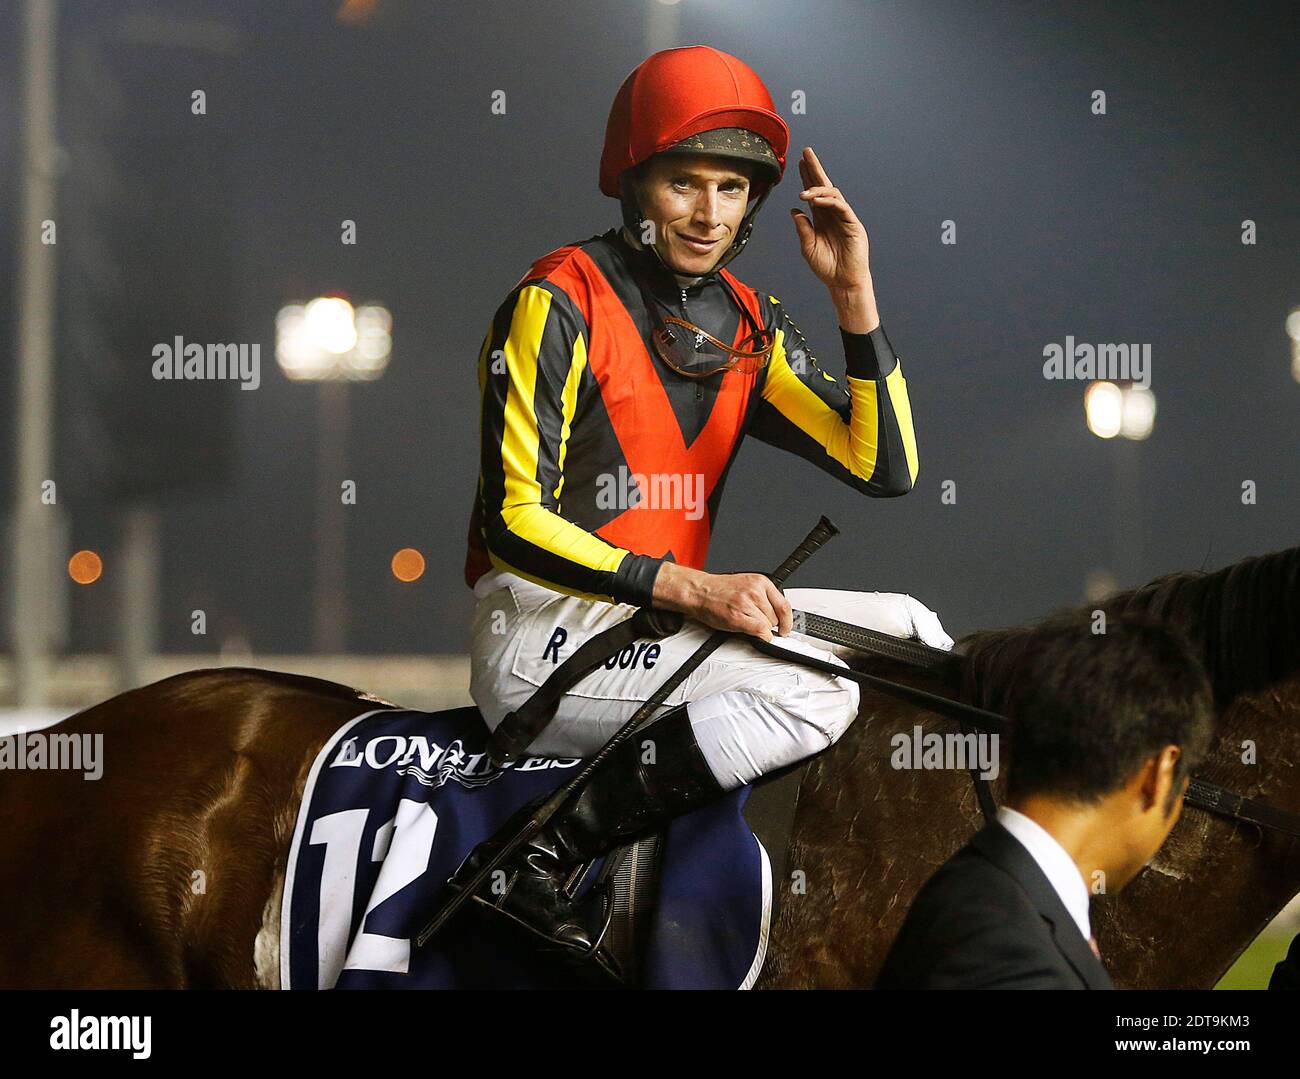 Britain's jockey Ryan Moore on his horse Gentildonna celebrates after winning the Dubai Sheeba Classic raceheld on Dubai World Cup day on March 29, 2013 at Meydan racecourse in Dubai, United Arab Emirates. A cosmopolitan gathering of horses from seven different countries contest the US$10 million Emirates Dubai World Cup at Meydan racecourse. Photo by Khaled Salem/ABACAPRESS.COM Stock Photo